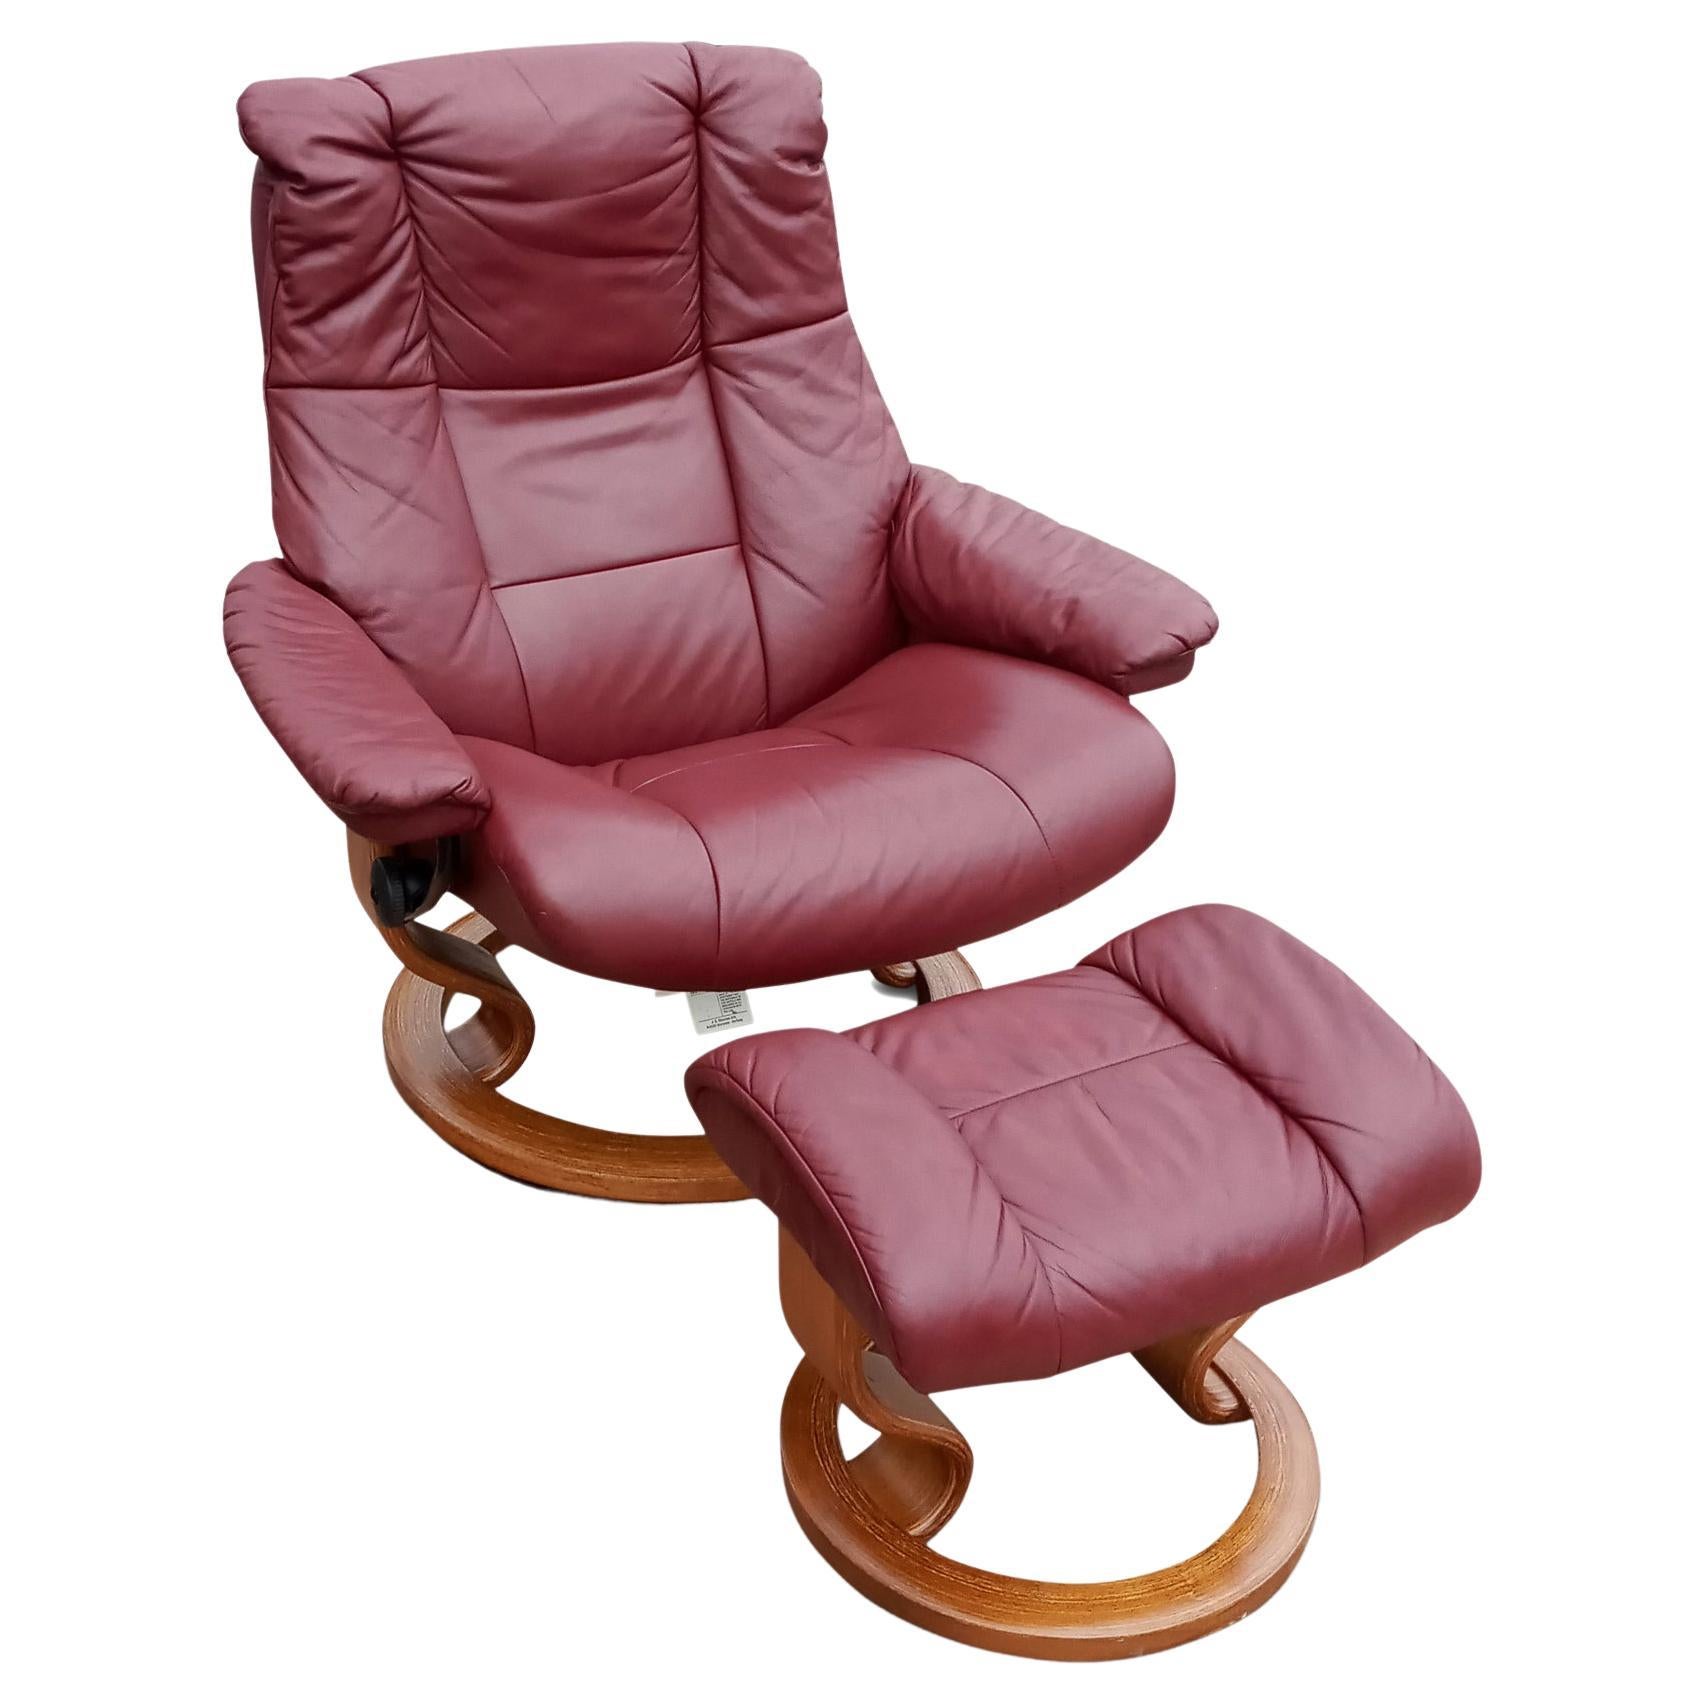 A Scandinavian style recliner and ottoman by Ekornes, their Stressless brand. With teak wood bases and metal frame and genuine leather upholstery, this is a comfortable burgundy color leather recliner on a round teak wood base that swivels 360